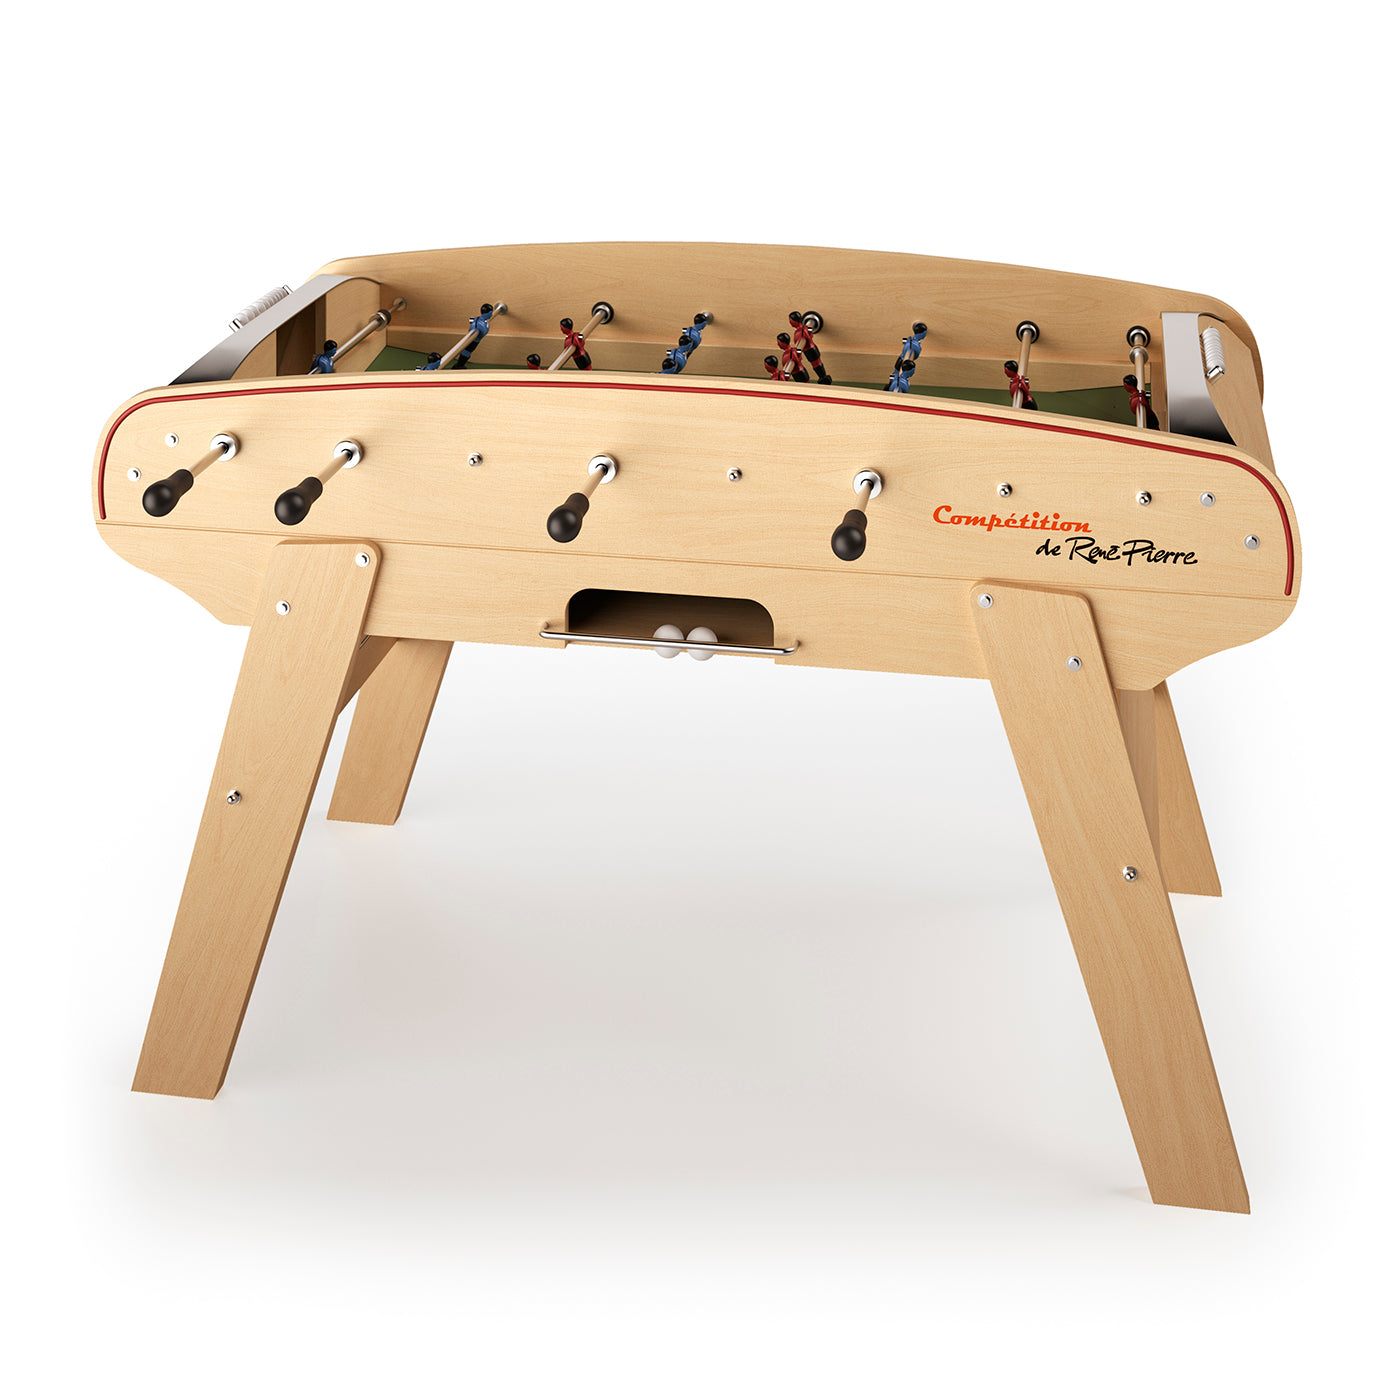 Full View of Made in France foosball table